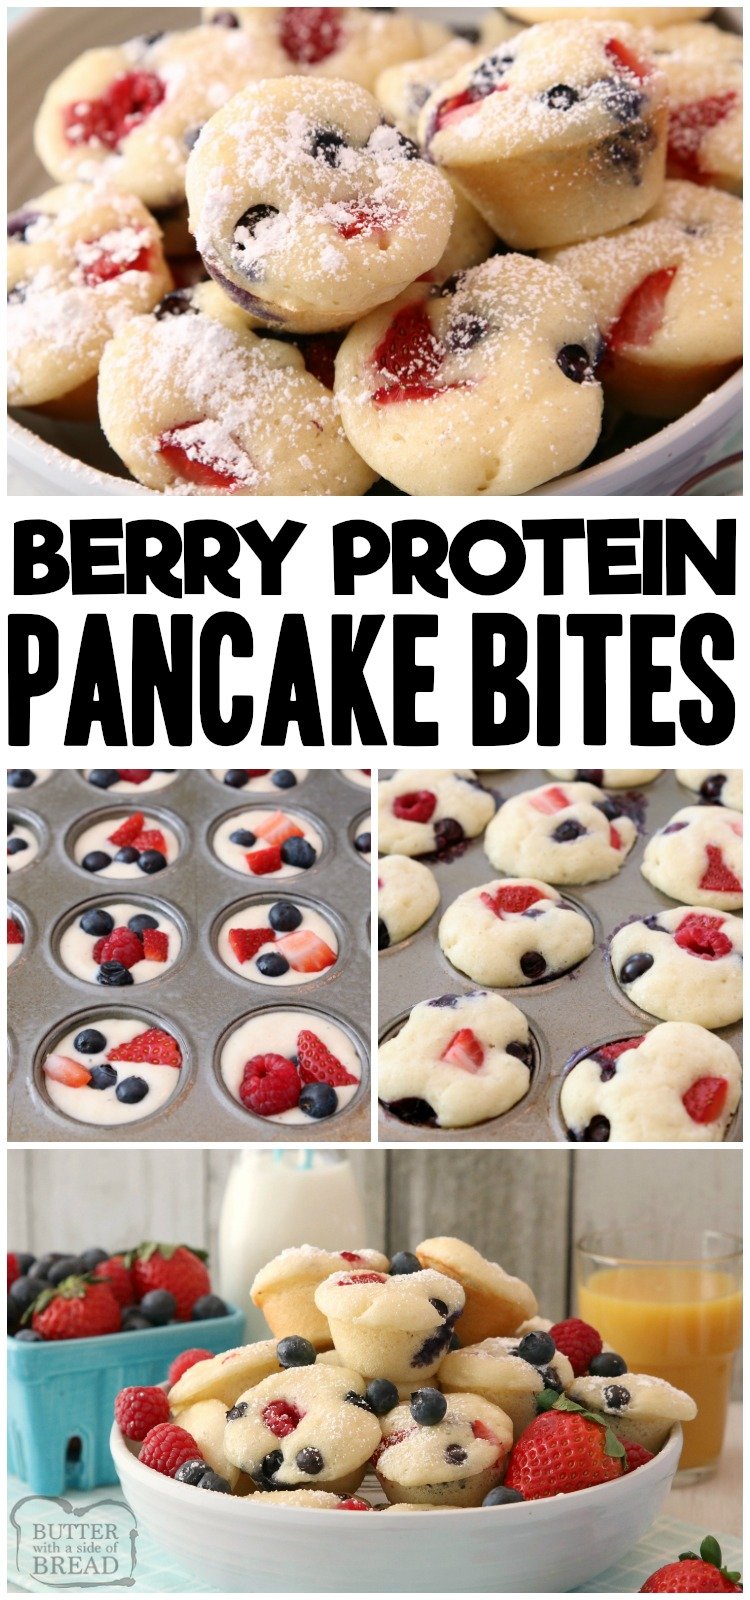 Berry Protein Pancake Bites made easy by baking protein pancake batter in the oven with fresh berries. Dust with powdered sugar or drizzle with syrup for a delicious, high protein breakfast. #protein #breakfast #pancakes #baking #berries #fruit #healthy #recipe from BUTTER WITH A SIDE OF BREAD